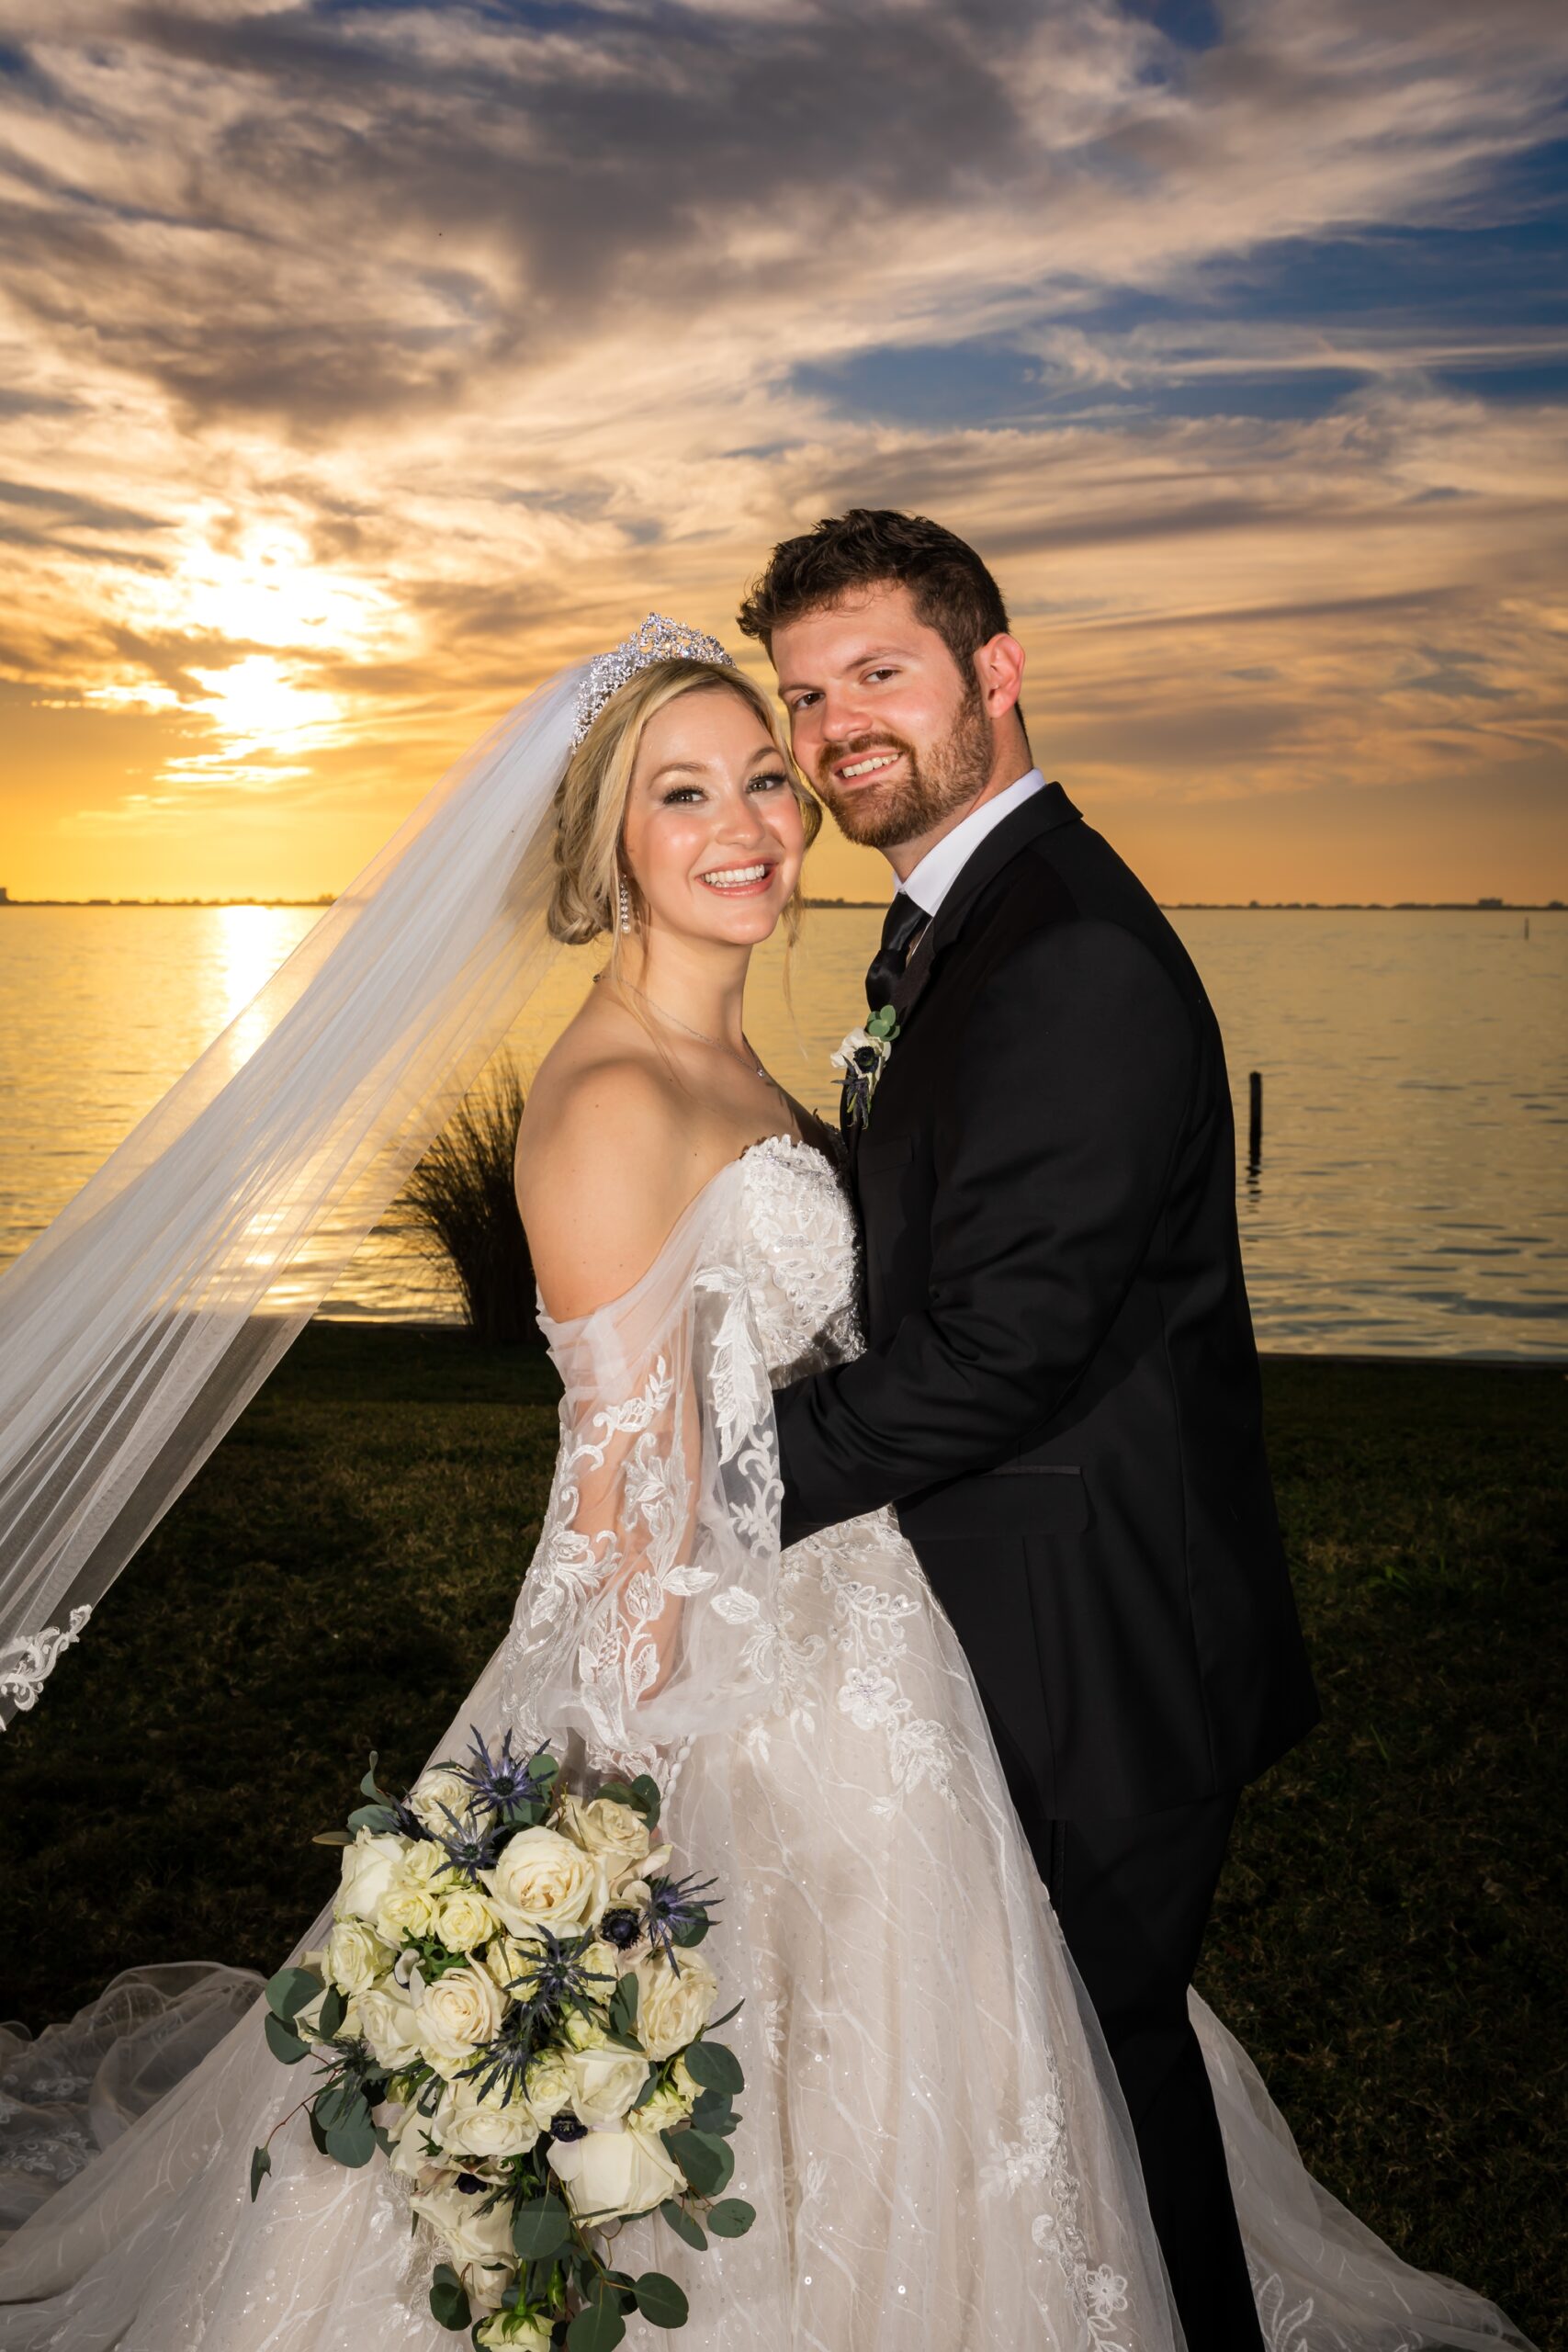 A stunning sunset portrait of Ethan and Morgan, who were just married at the Powel Crosley Estate. 